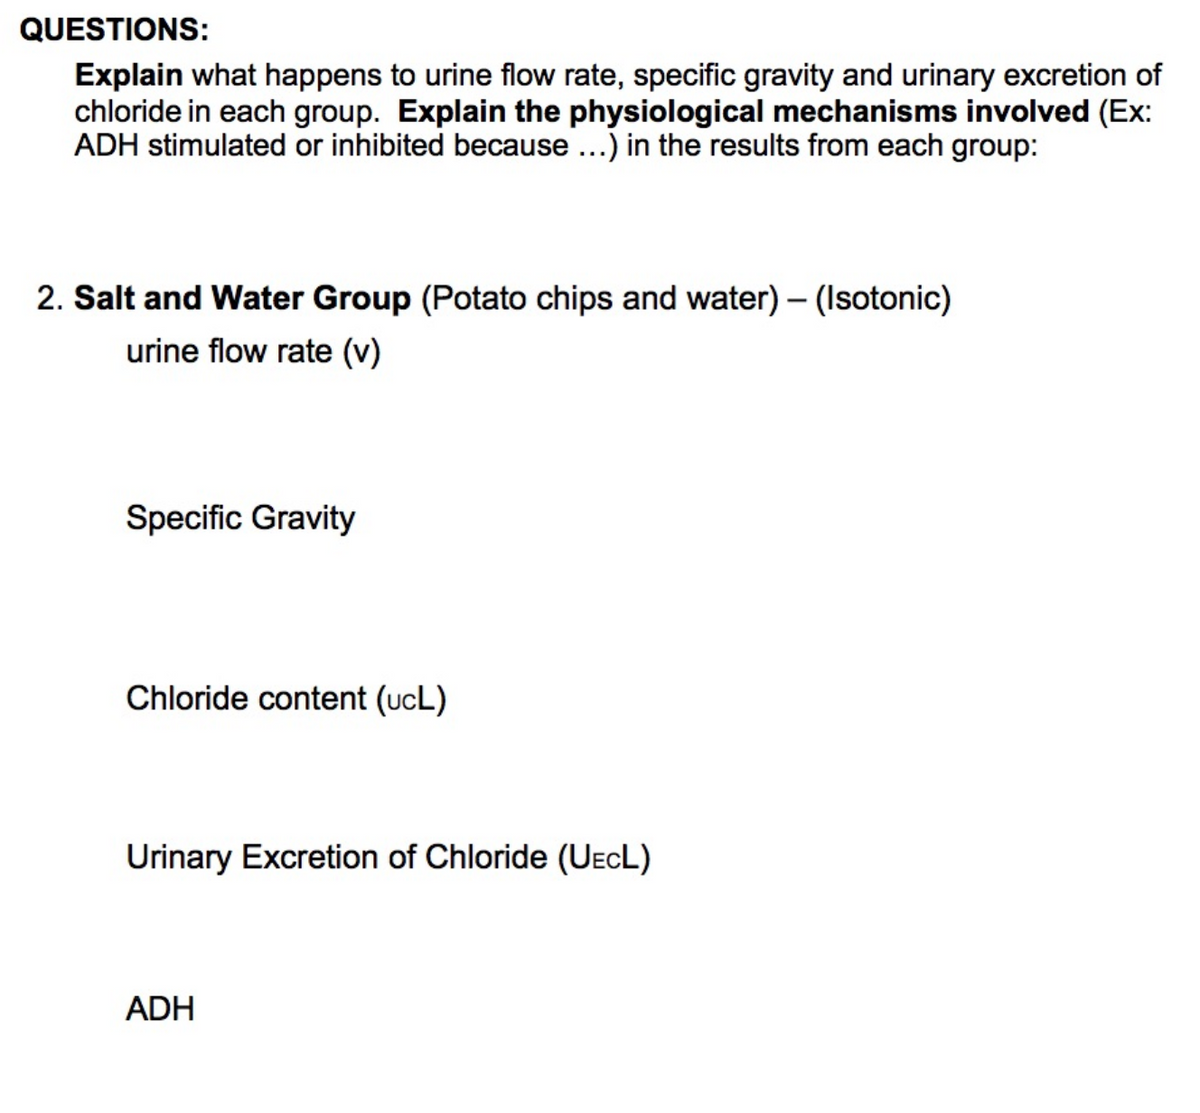 QUESTIONS:
Explain what happens to urine flow rate, specific gravity and urinary excretion of
chloride in each group. Explain the physiological mechanisms involved (Ex:
ADH stimulated or inhibited because ...) in the results from each group:
2. Salt and Water Group (Potato chips and water) – (Isotonic)
urine flow rate (v)
Specific Gravity
Chloride content (ucL)
Urinary Excretion of Chloride (UECL)
ADH
